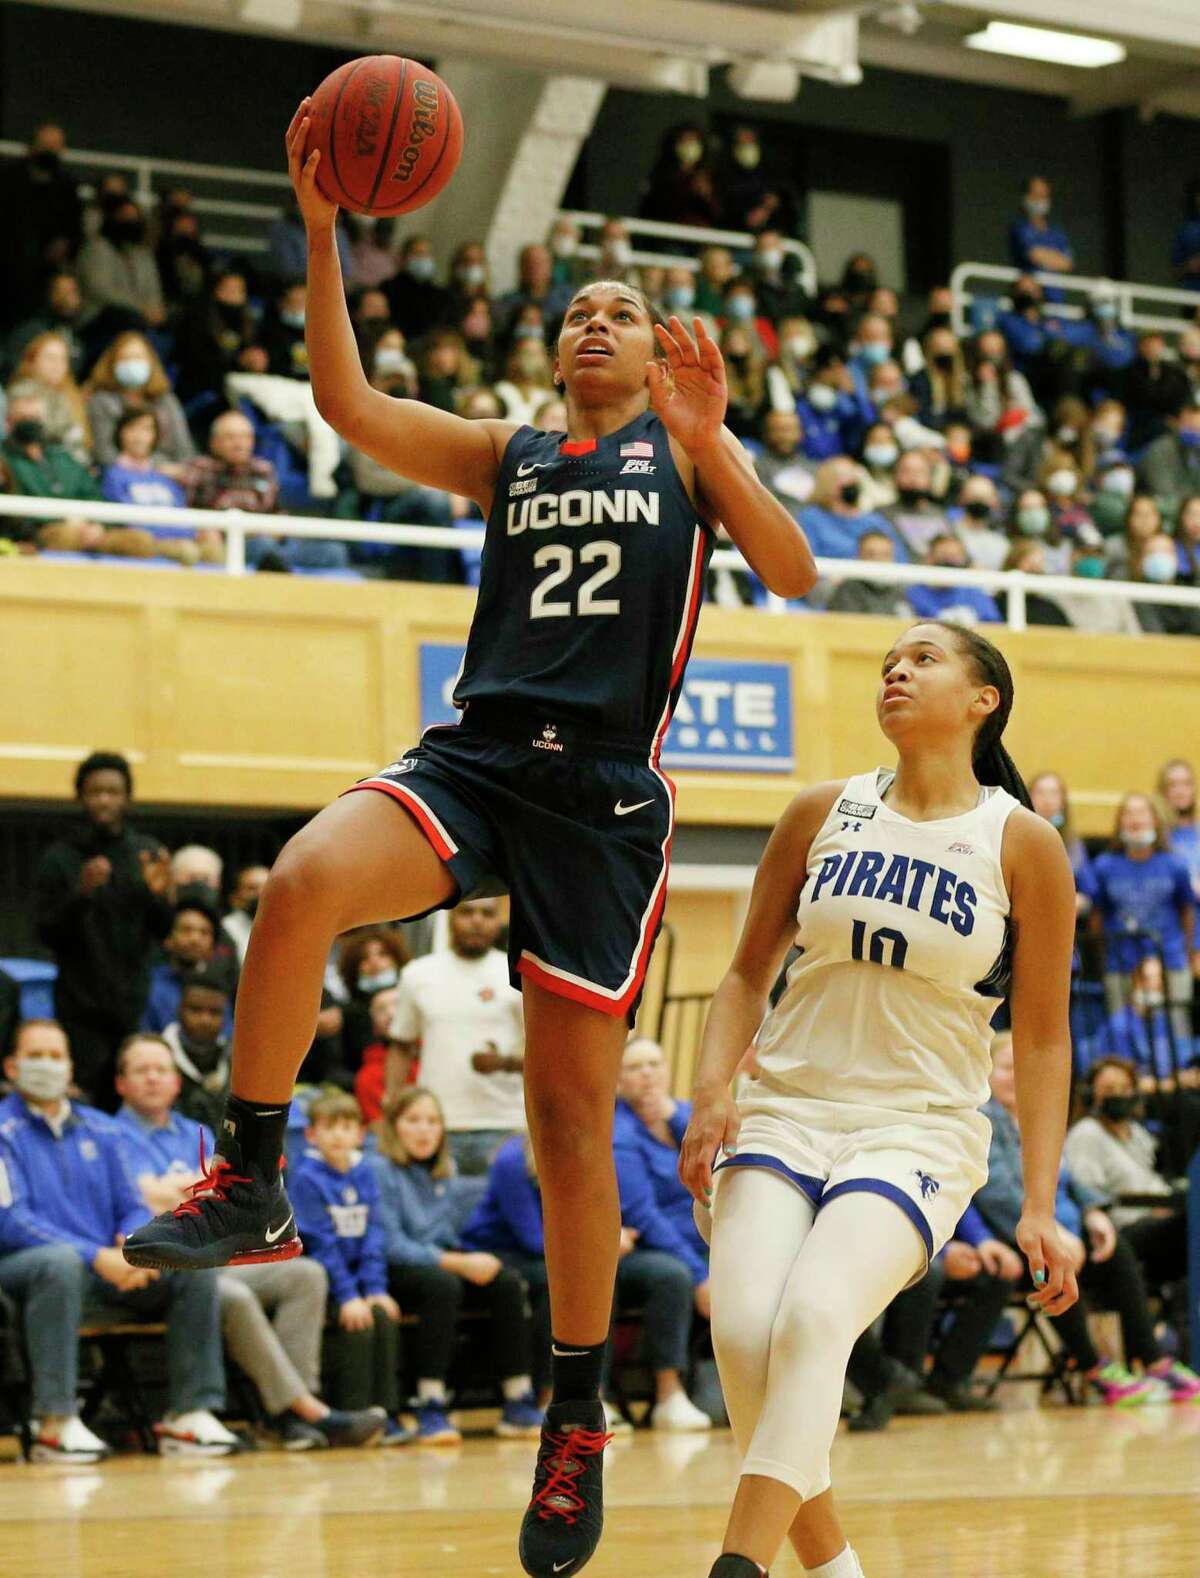 UConn guard Evina Westbrook (22) drives to the basket against Seton Hall forward Mya Bembry (10) during the second half of an NCAA college basketball game on Friday, Dec. 3, 2021, in South Orange, N.J.